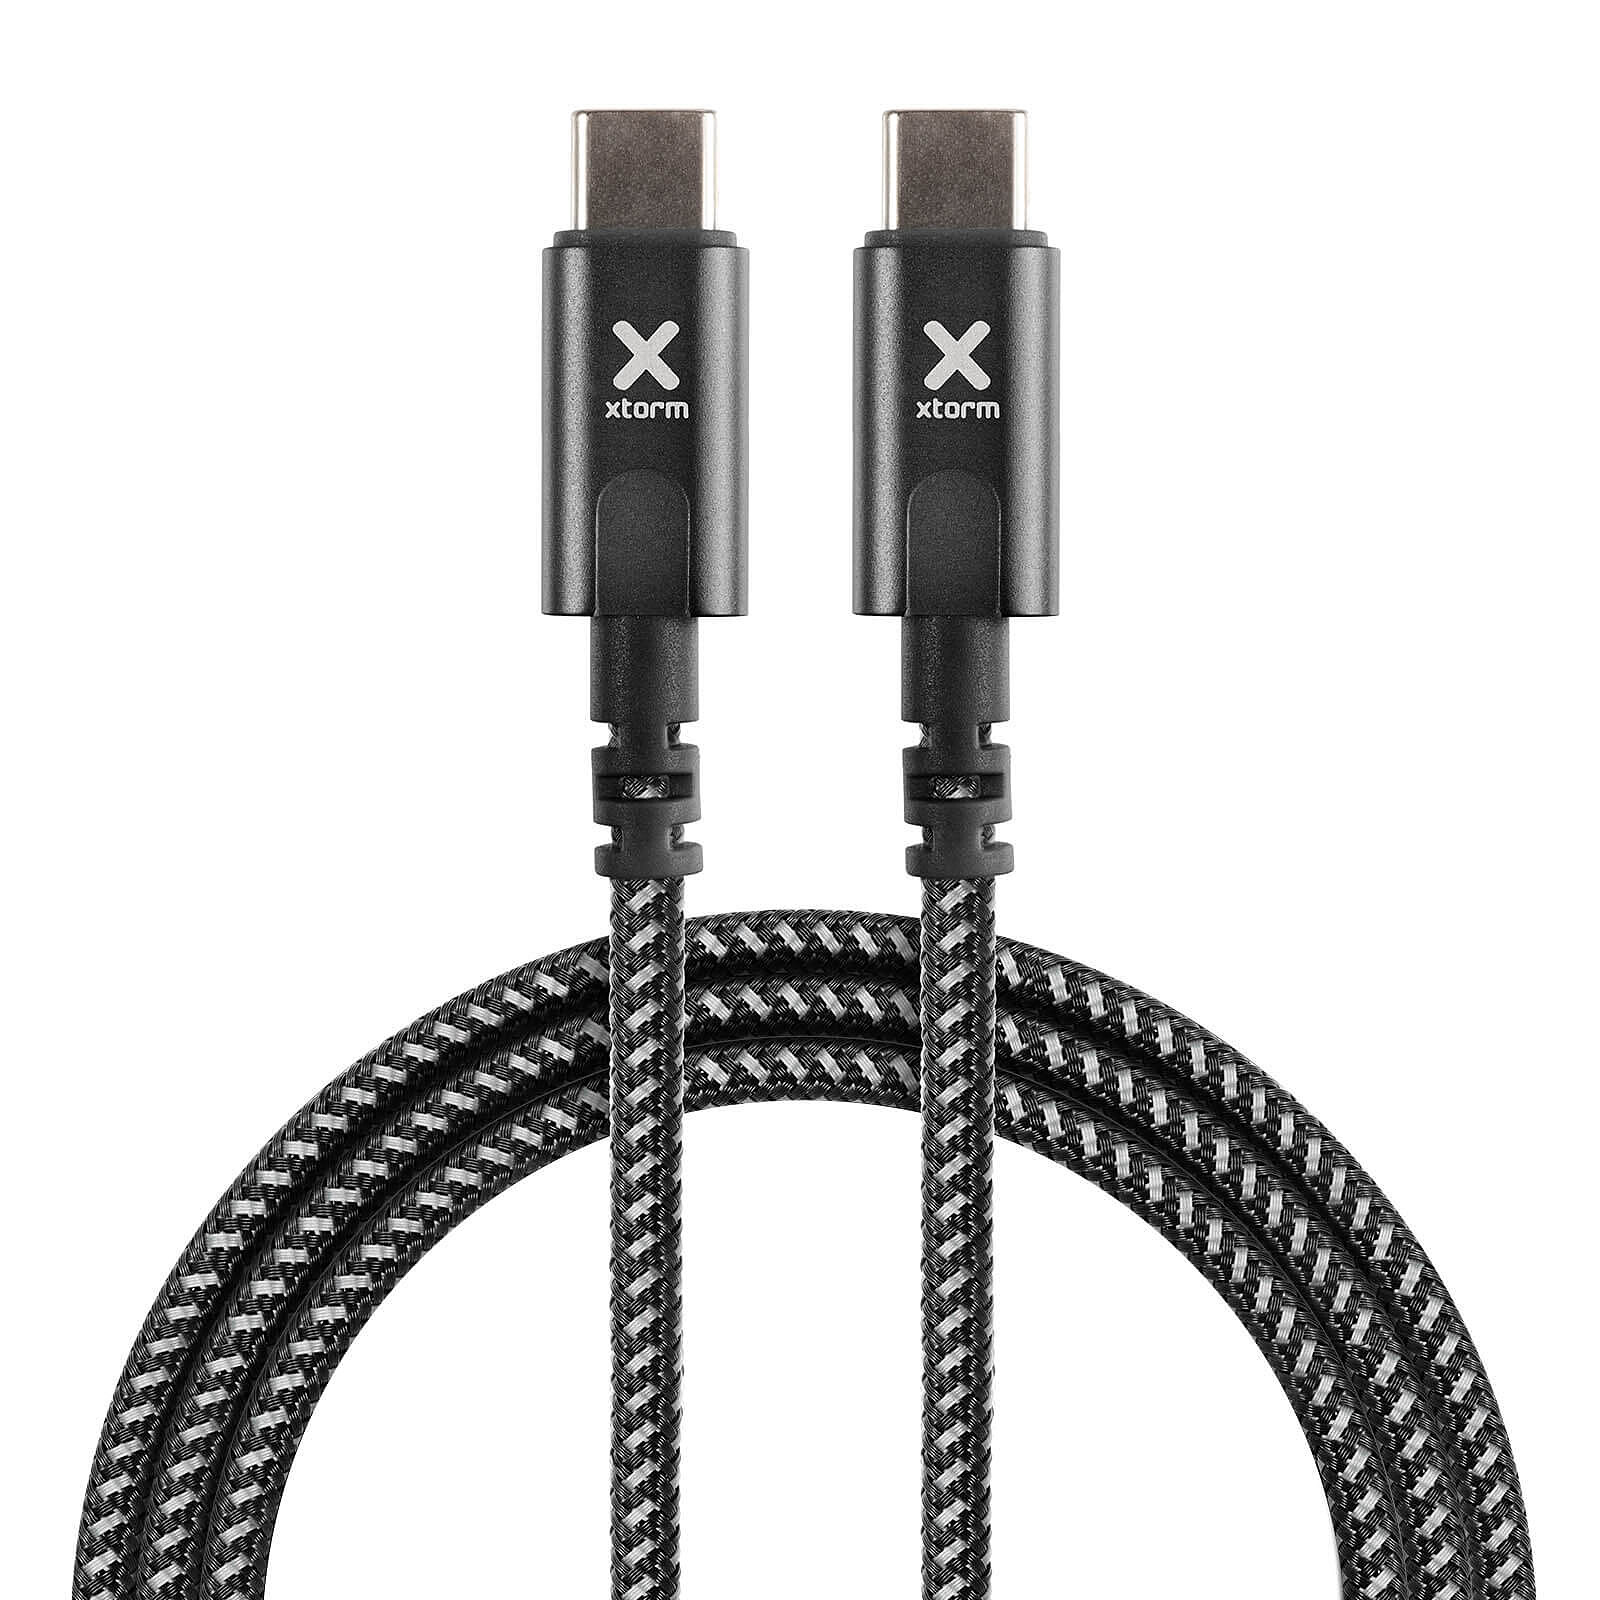 CABLE CHARGE & SYNCHRO POWER DELIVERY USB-C VERS TYPE-C 2M BLANC